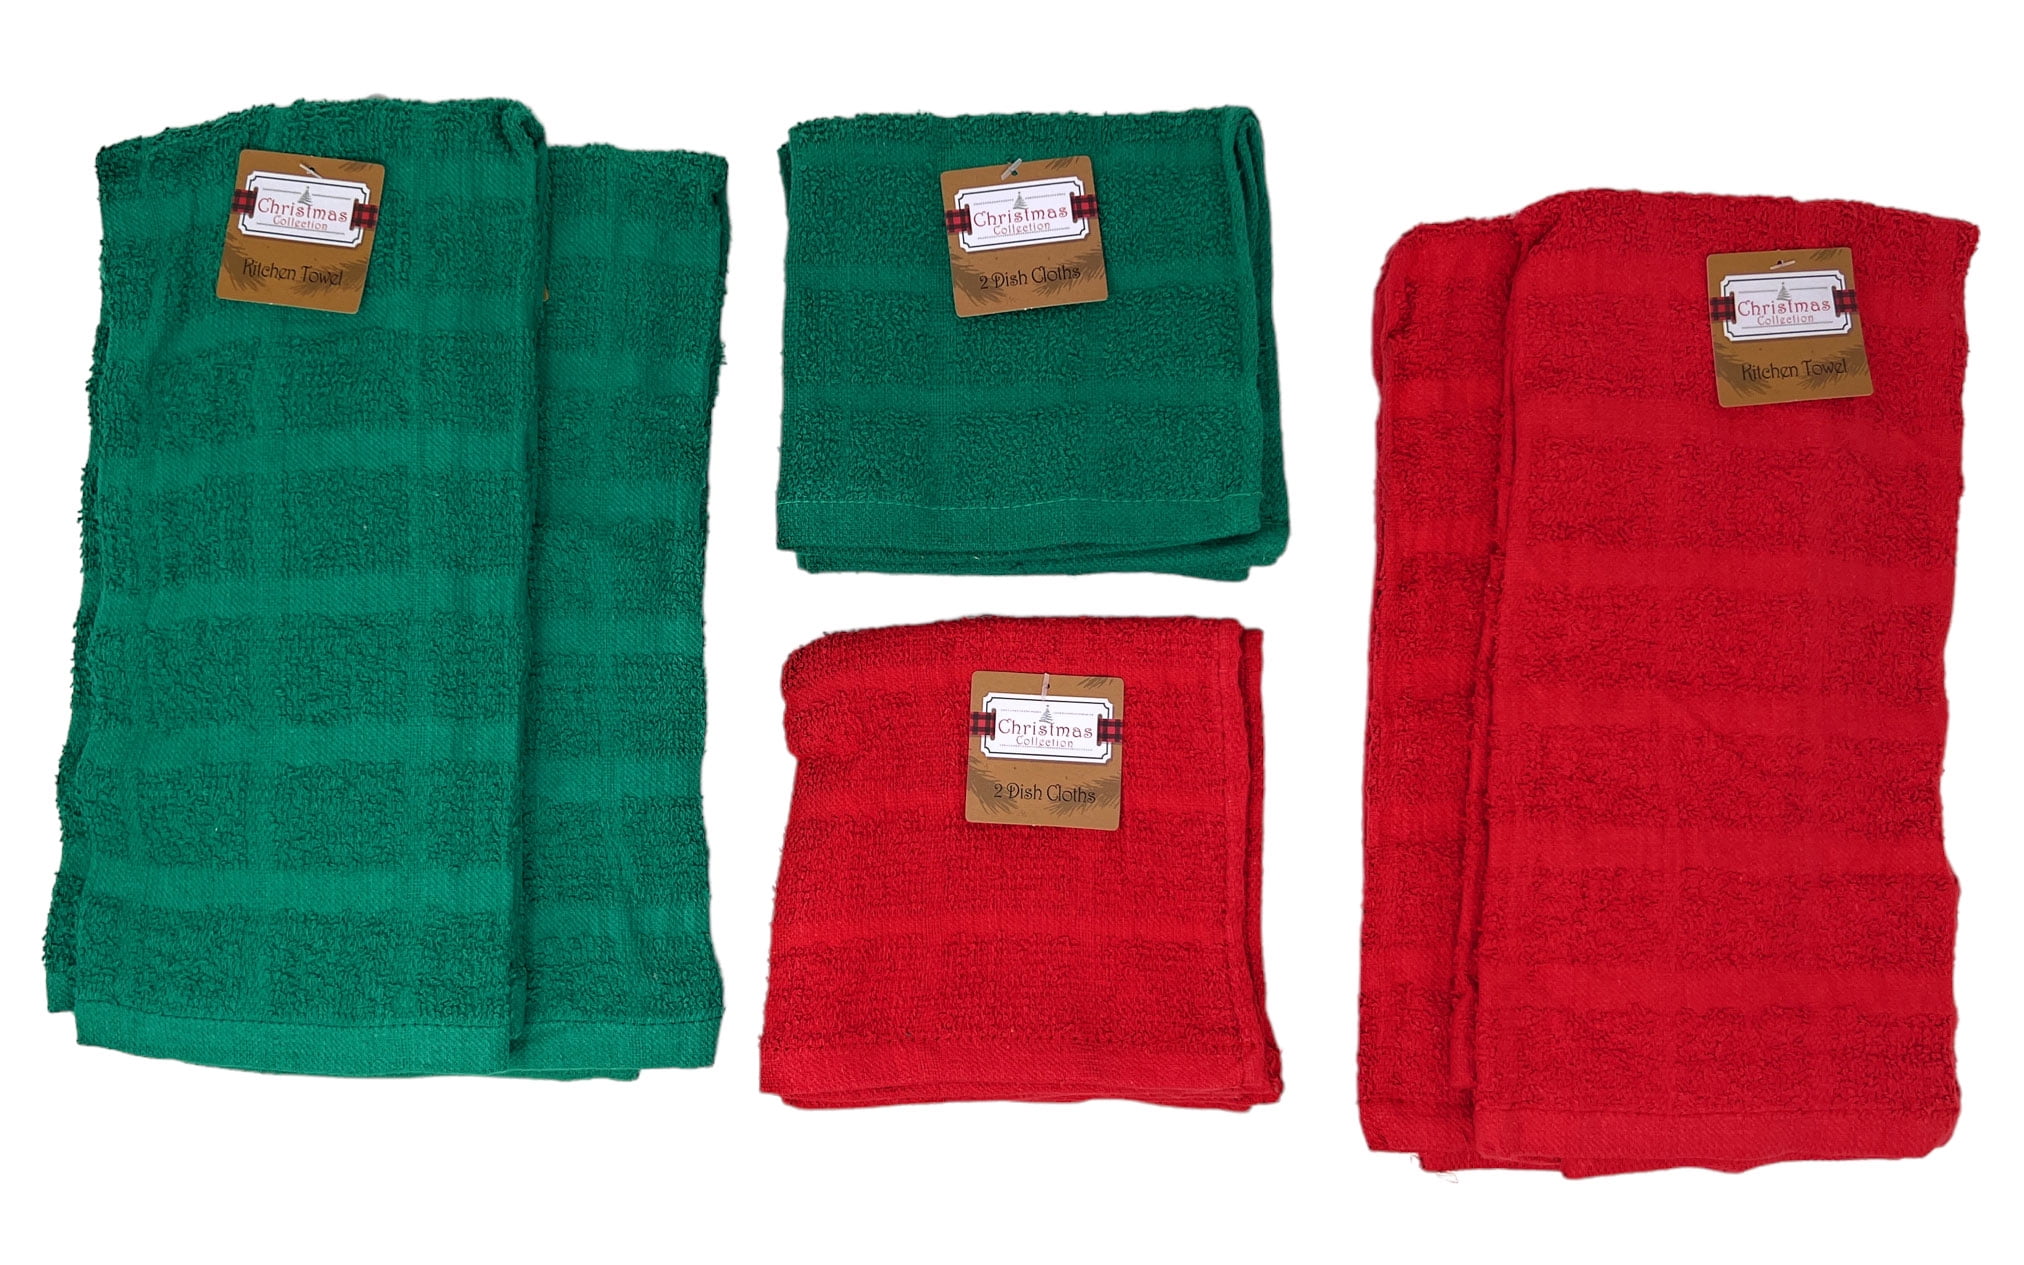 Honeycomb Kitchen Towels 8 Pack Choose Red,Green,Yellow Cotton Dish Towels  # 720